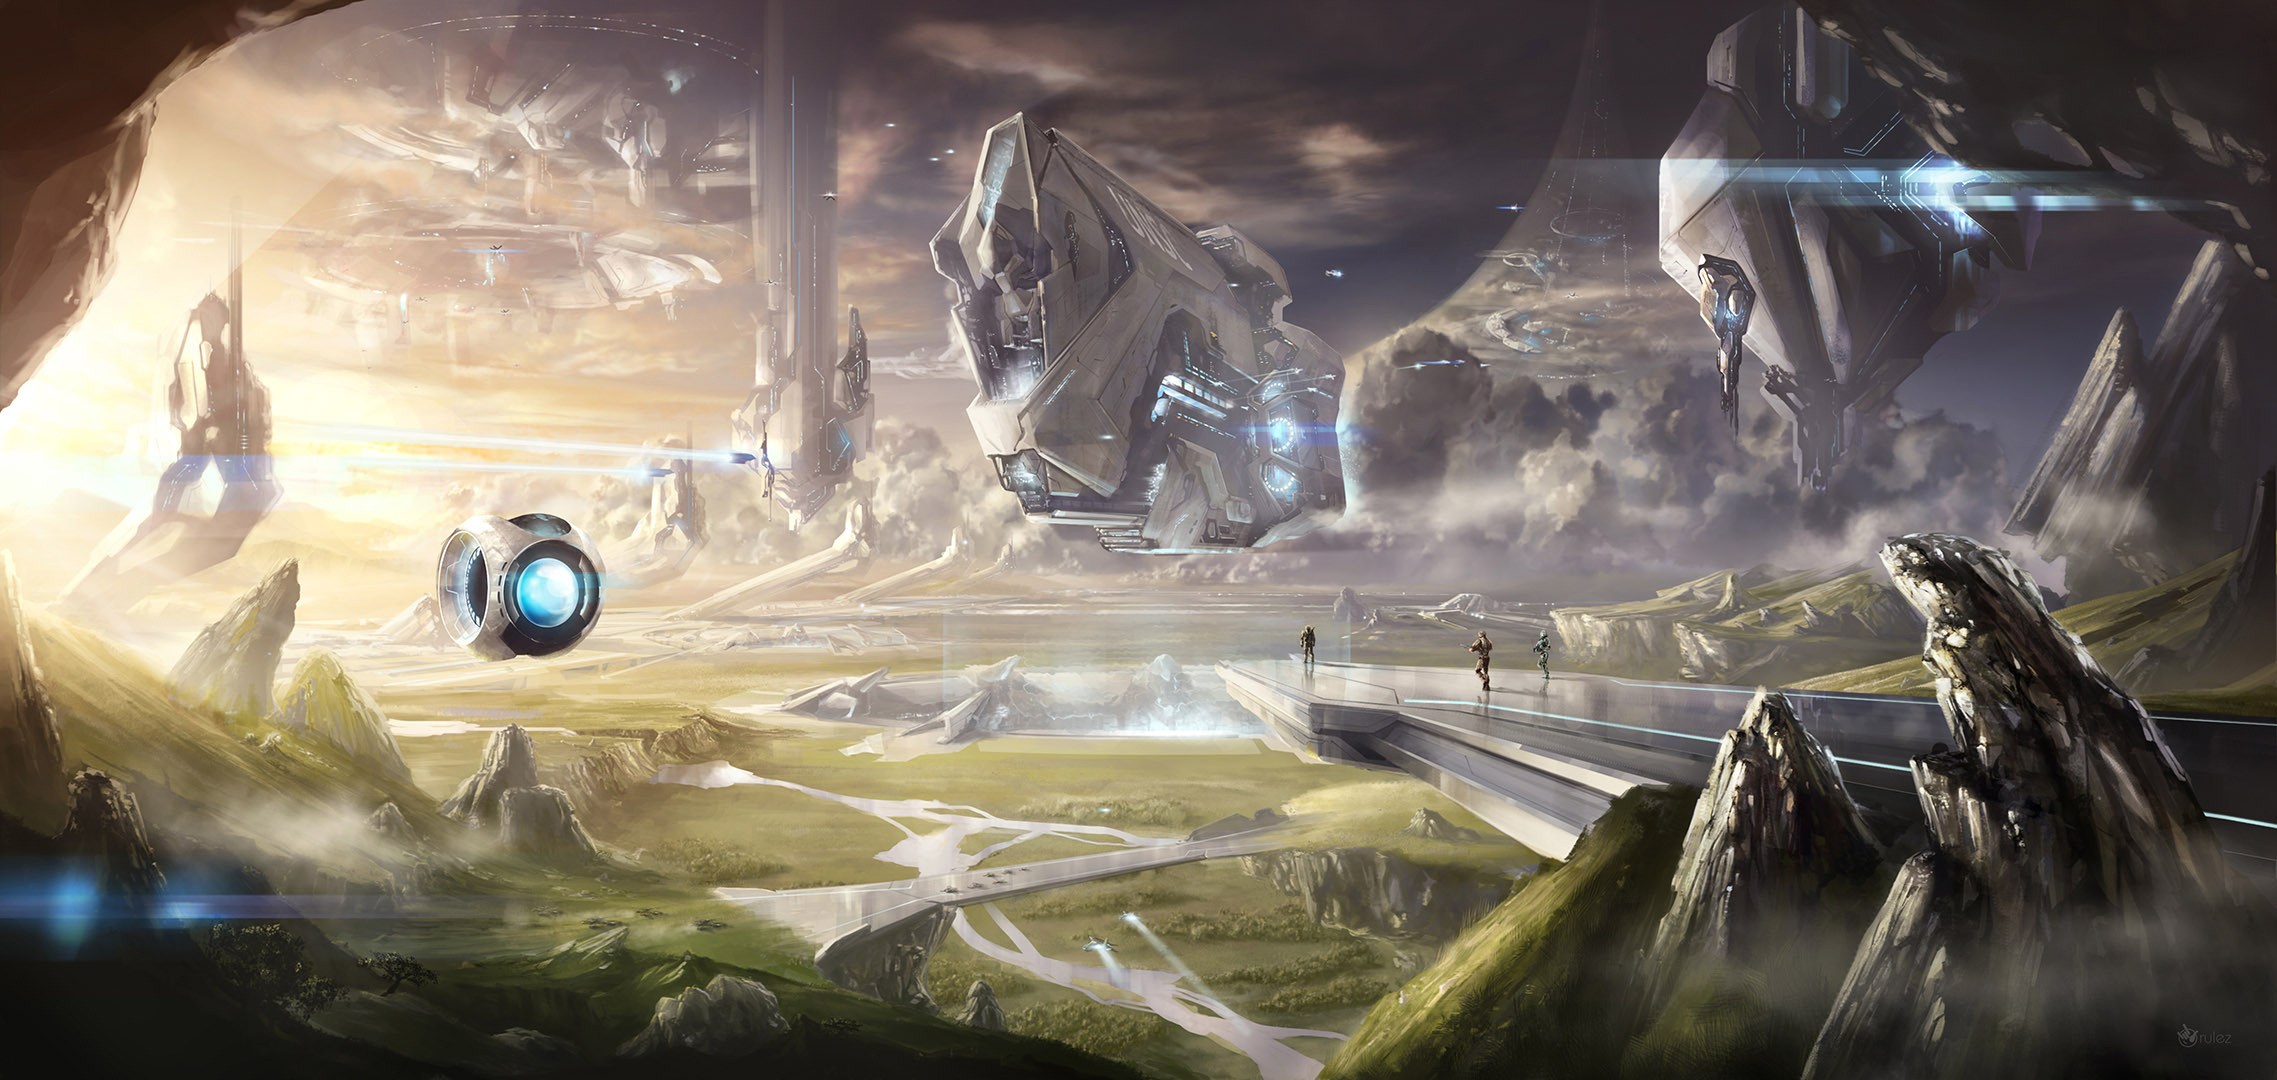 people, video game, halo, landscape, spaceship